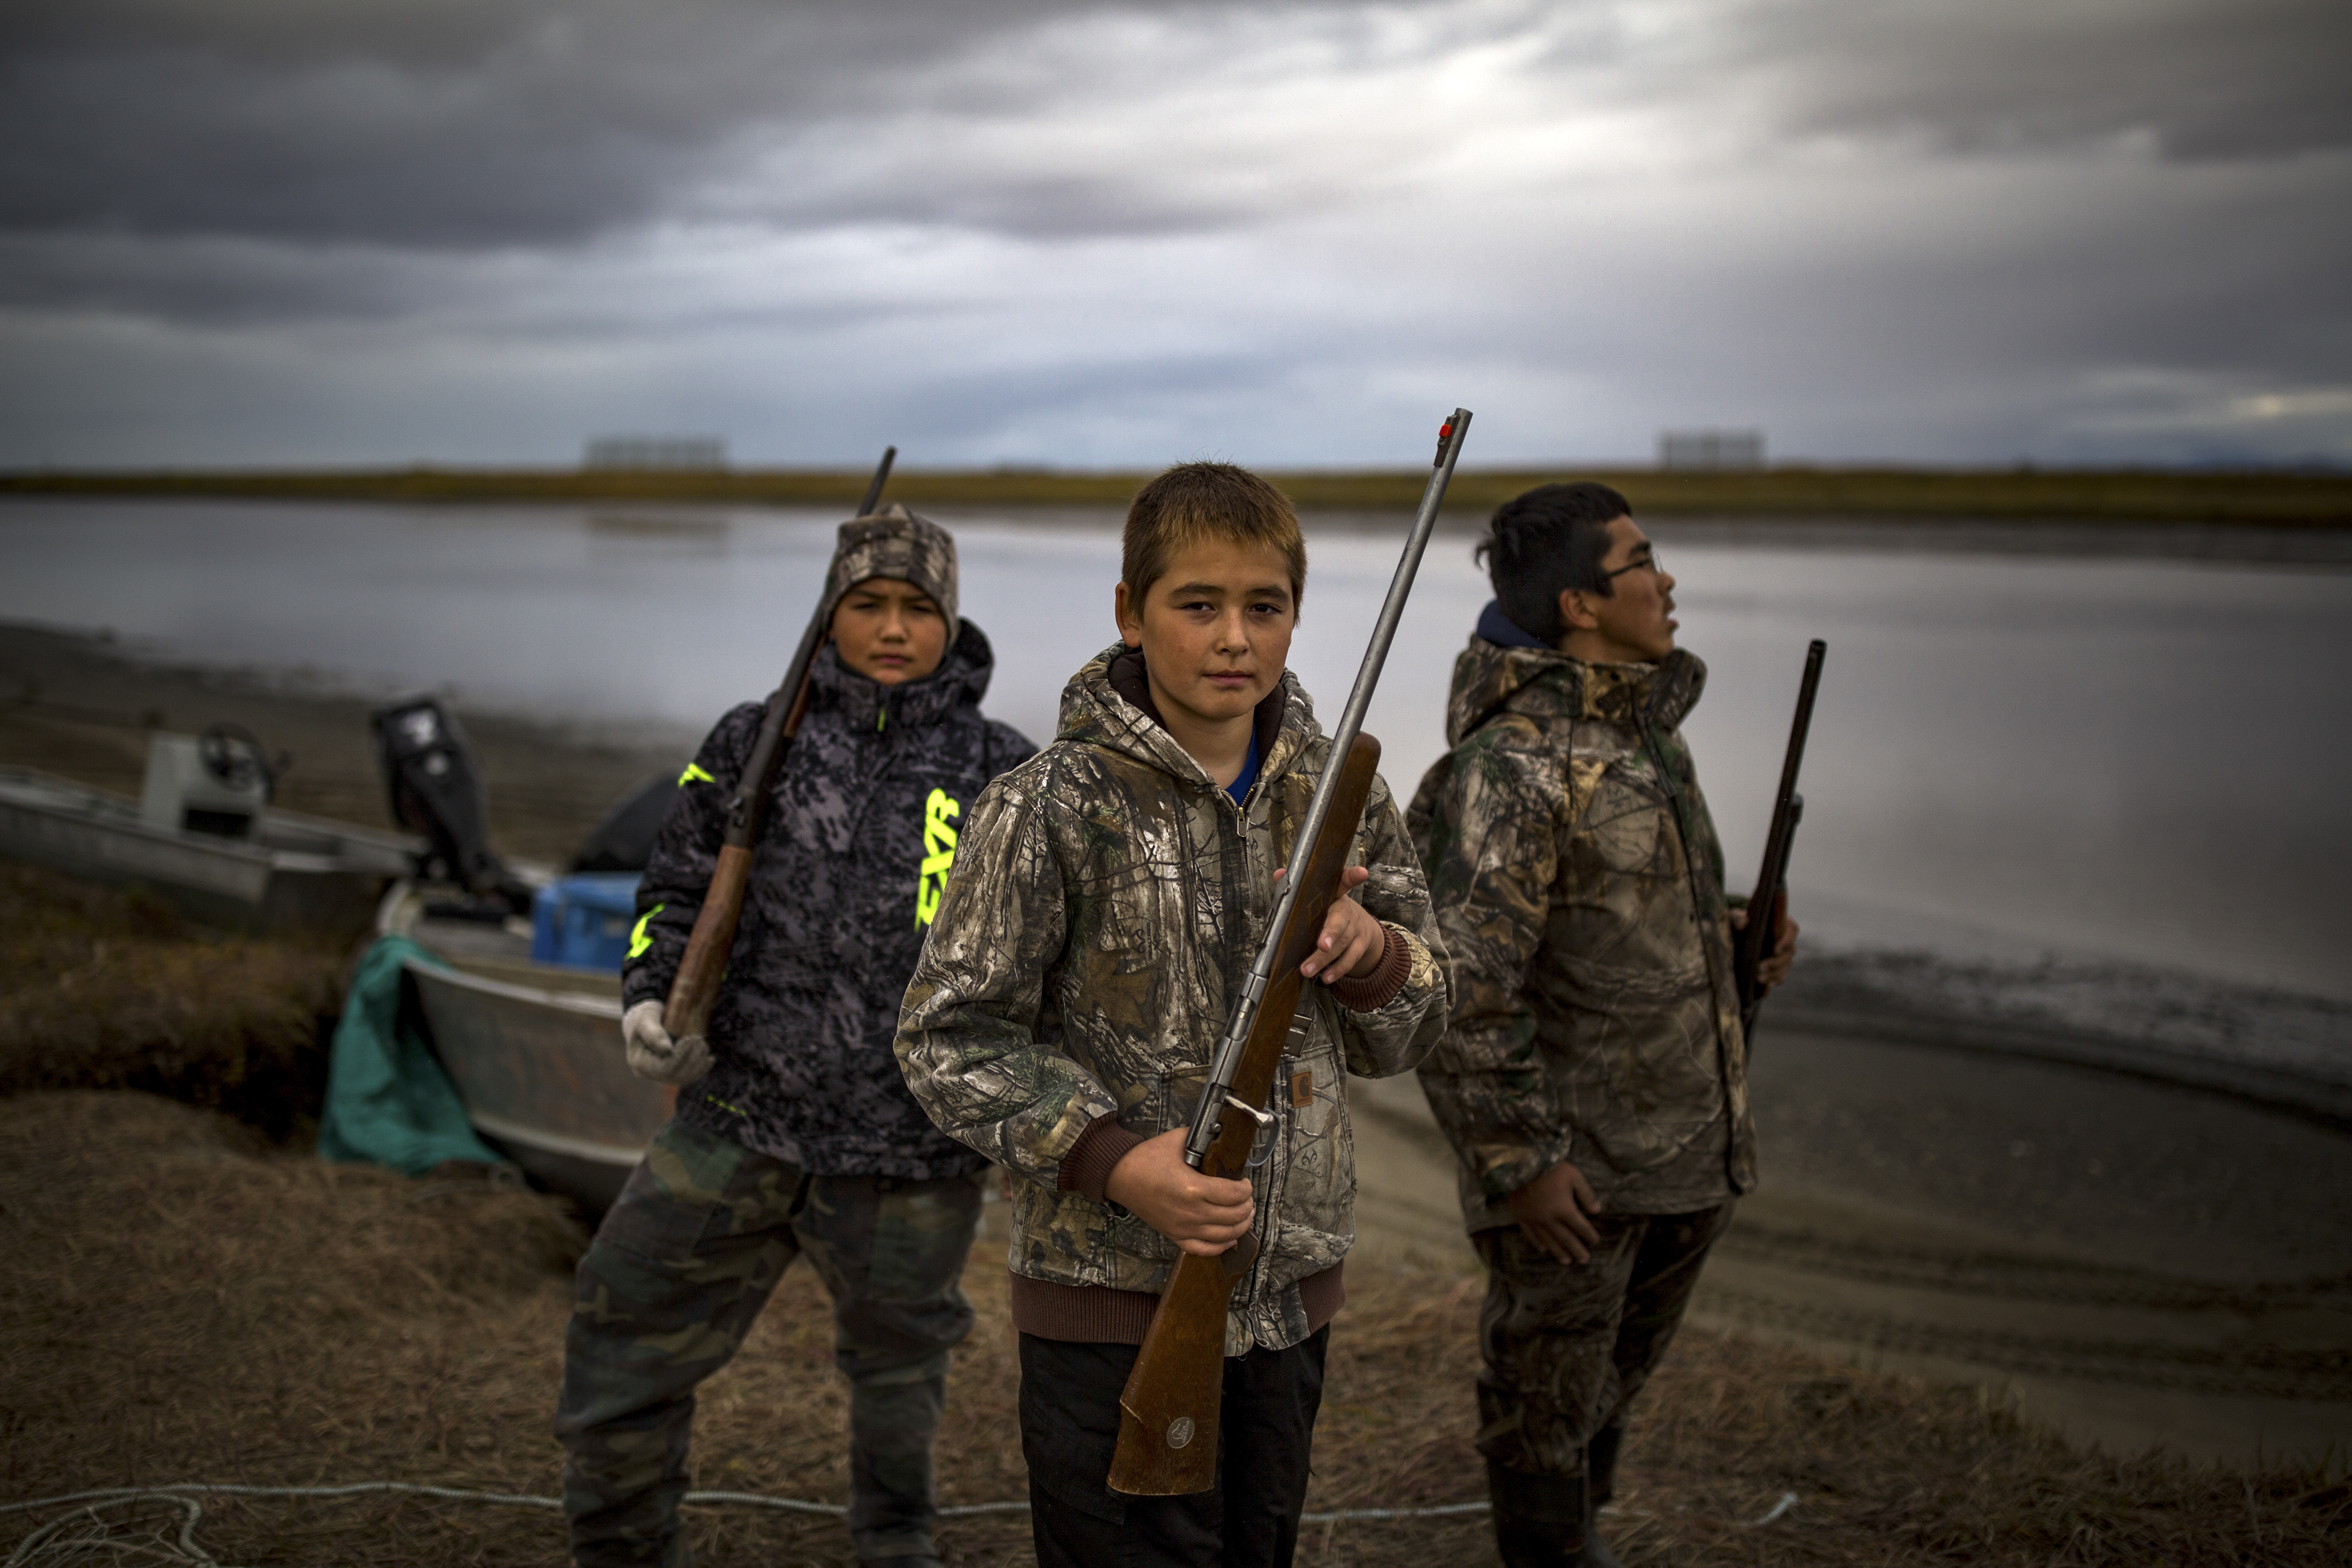 From left: Skyler Jones, 12, Keenan Jackson, 11, and Taylor Kulukhon, 14, head out to hunt, in the Alaskan village of Shaktoolik, Sept. 17, 2016. Laid out on a narrow spit of sand between the Tagoomenik River and the Bering Sea, the village is facing an imminent threat from increased flooding and erosion, signs of a changing climate. (Josh Haner/The New York Times)